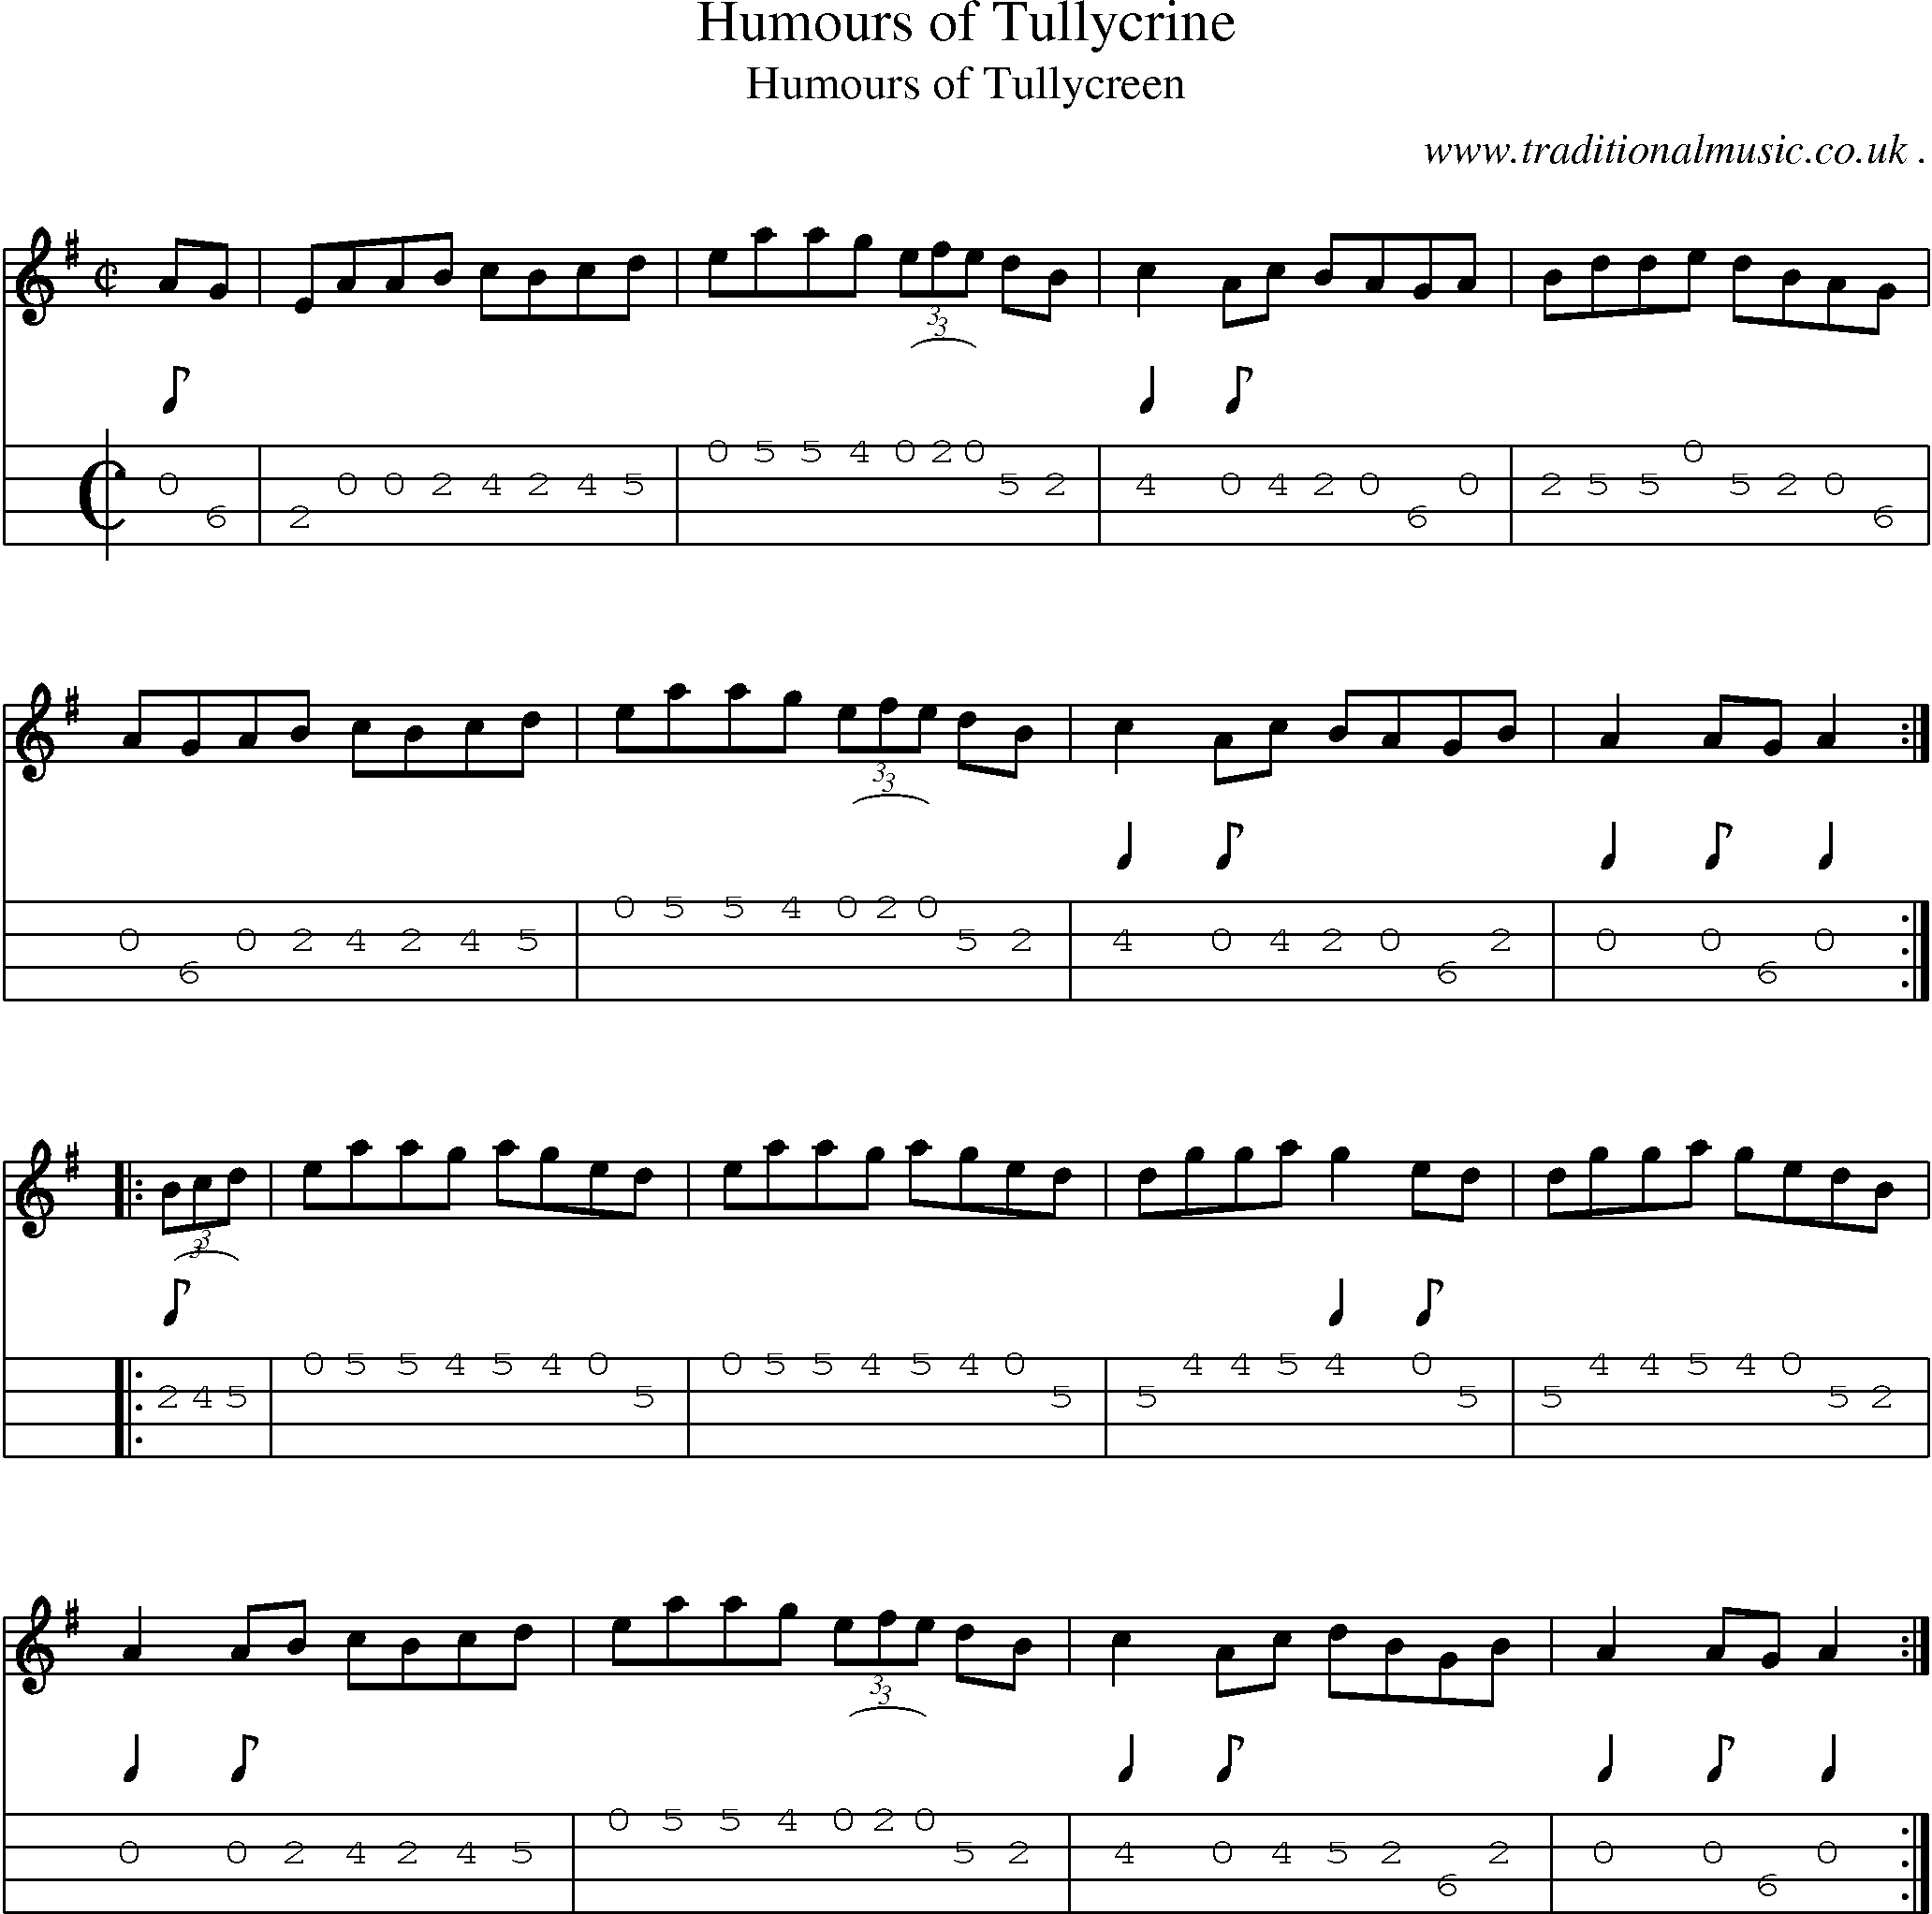 Sheet-Music and Mandolin Tabs for Humours Of Tullycrine